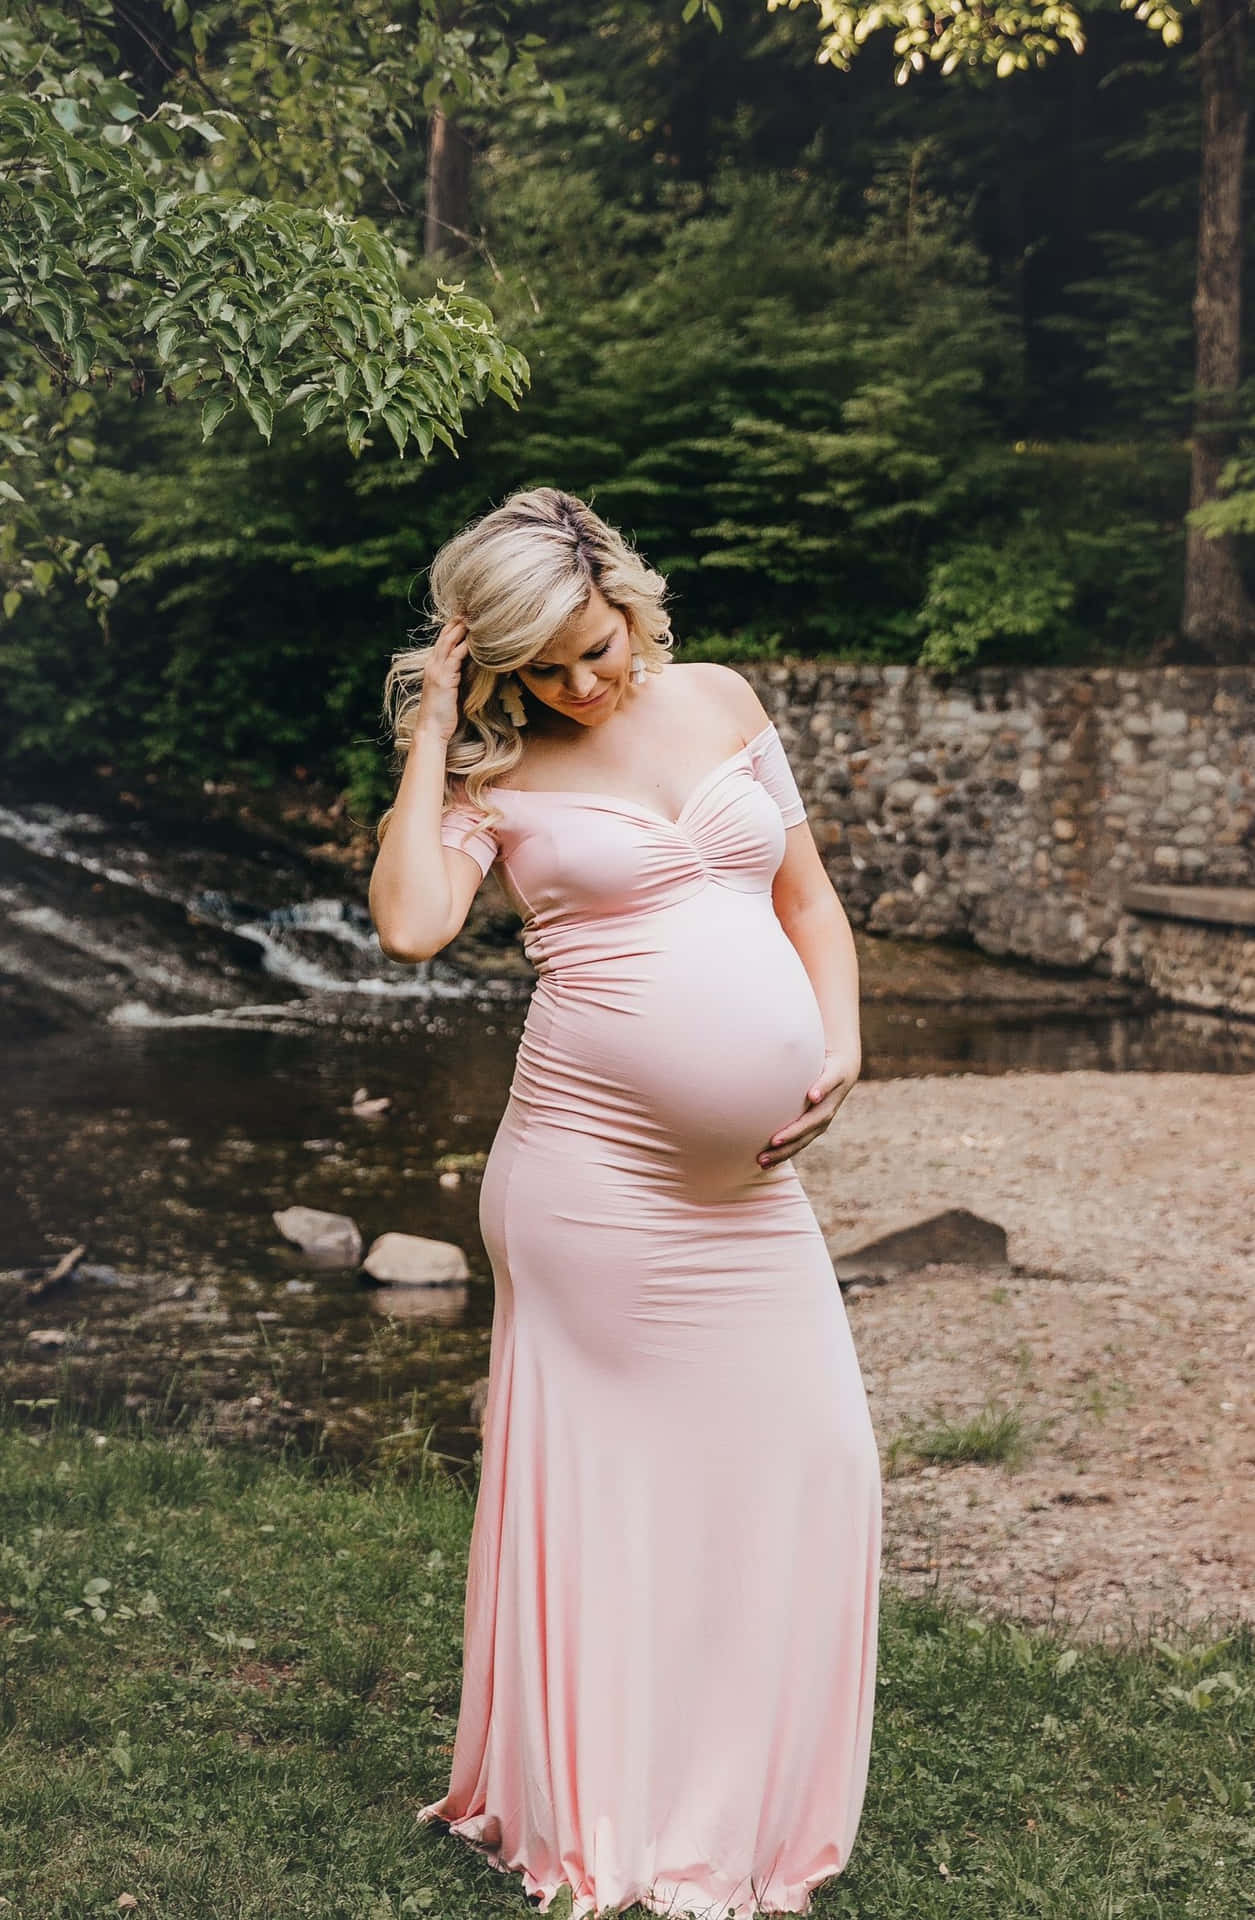 Embrace the Magic of Pregnancy